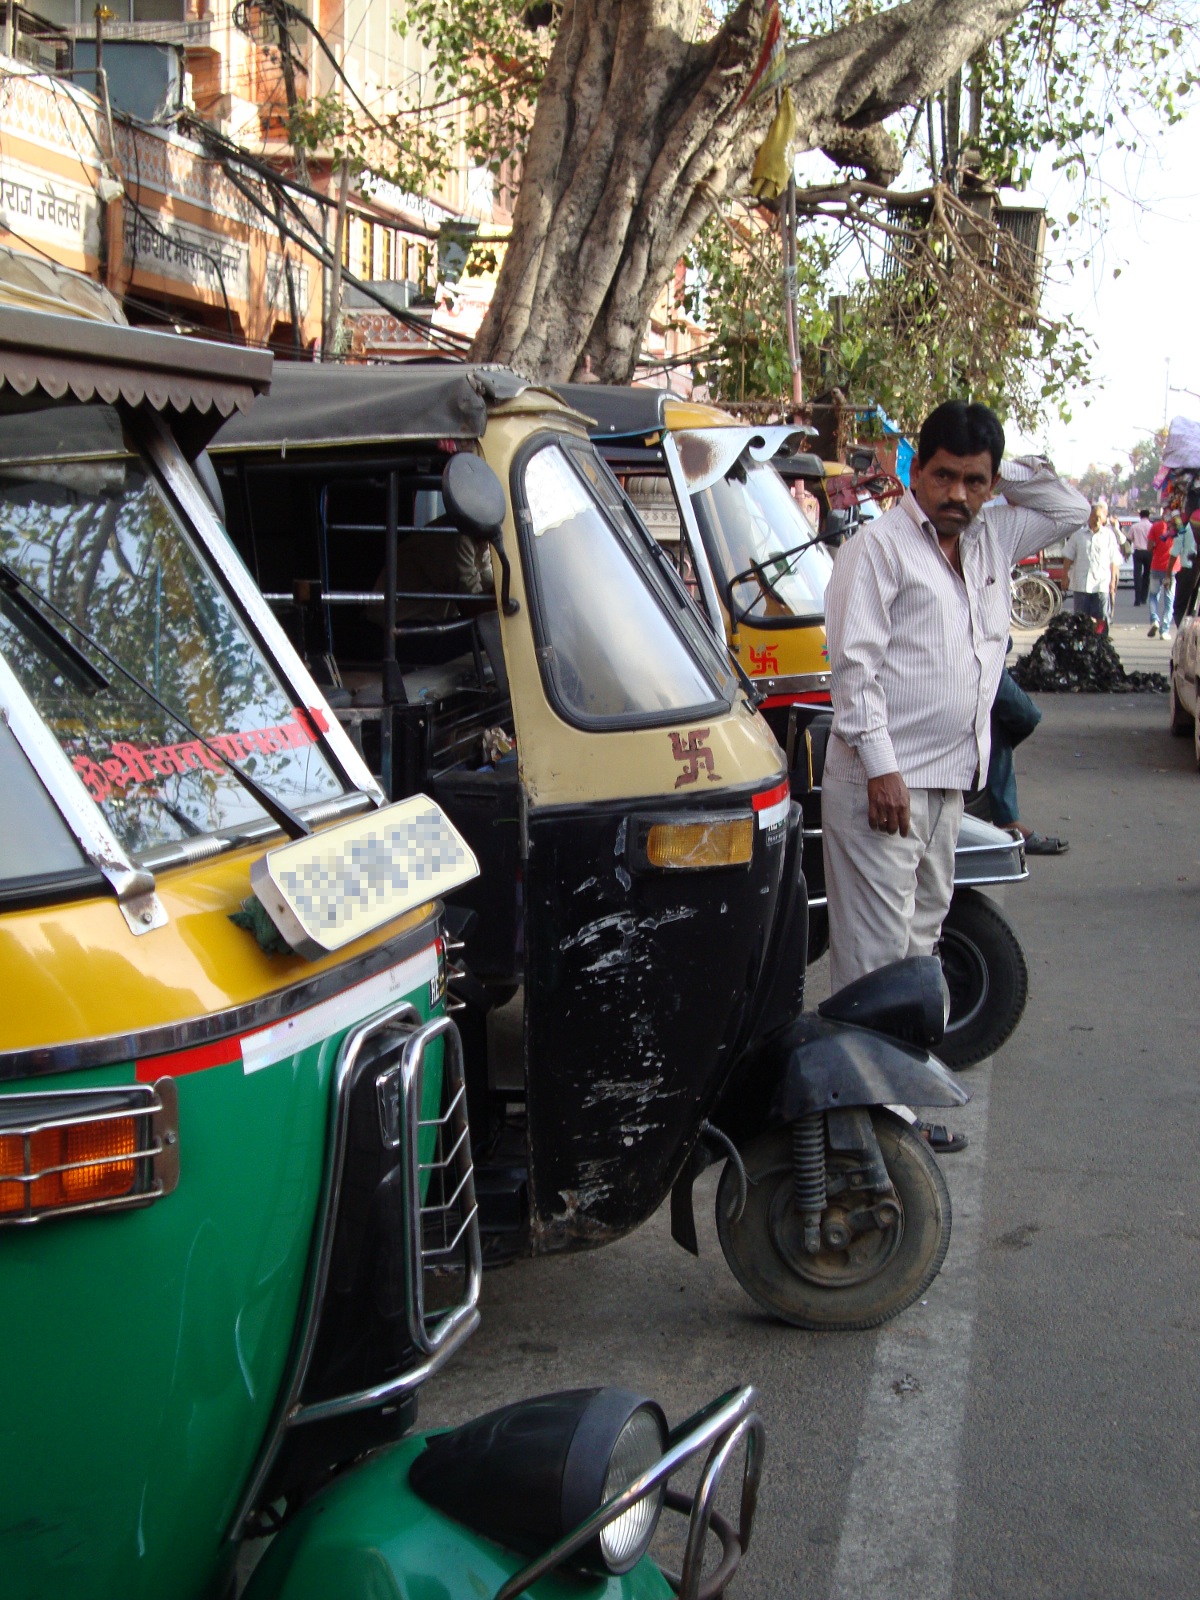 Are these rickshaws or tuk-tuks? It depends on whom you ask.